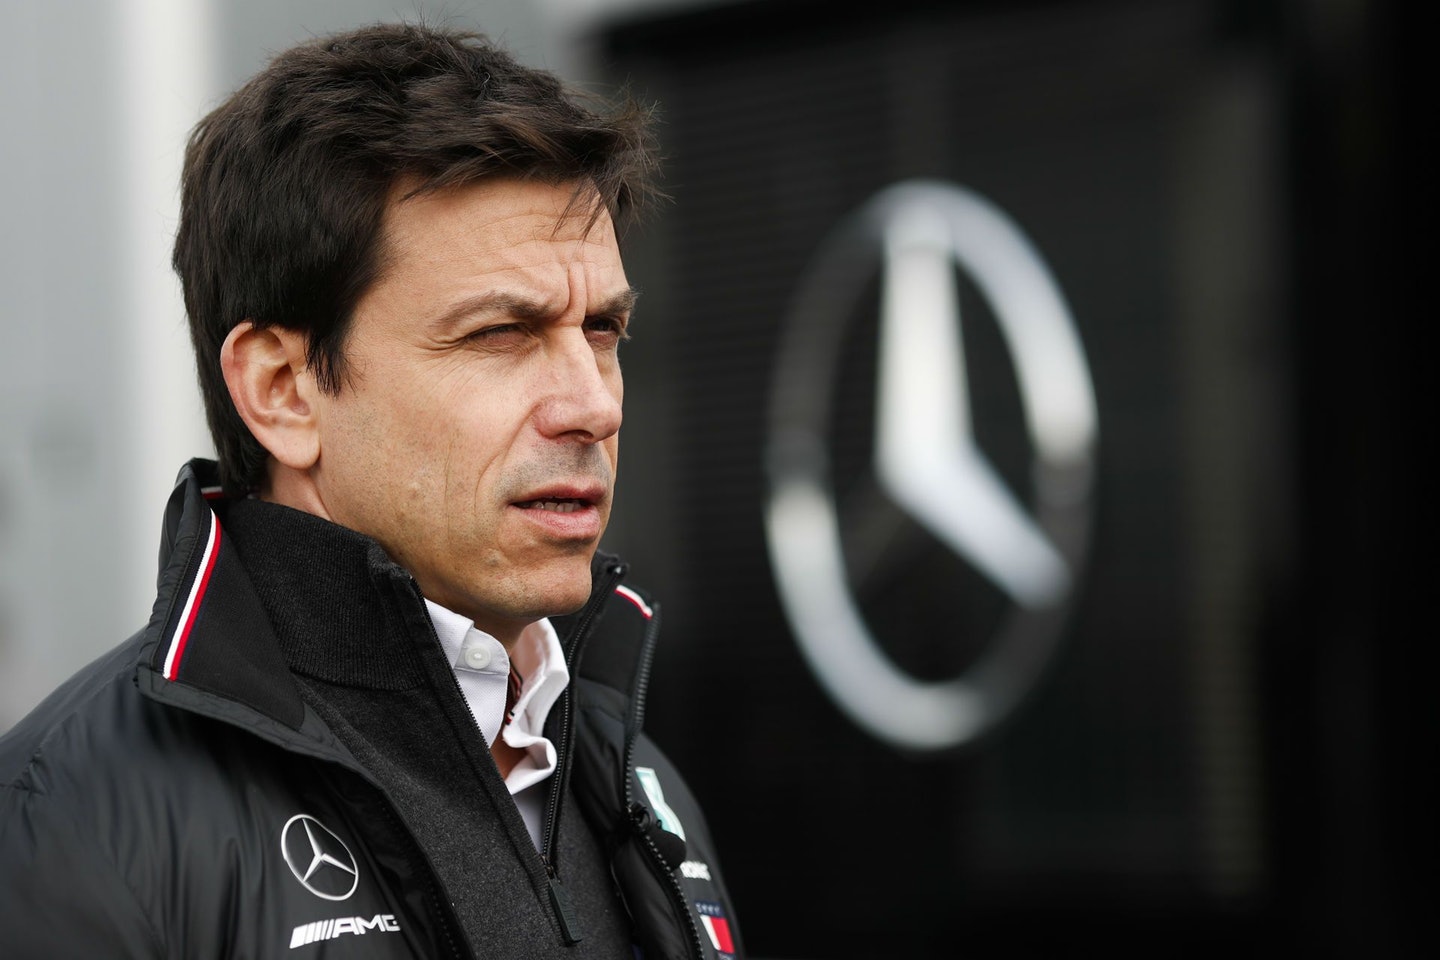 Toto Wolff will need to lay off hundreds of people